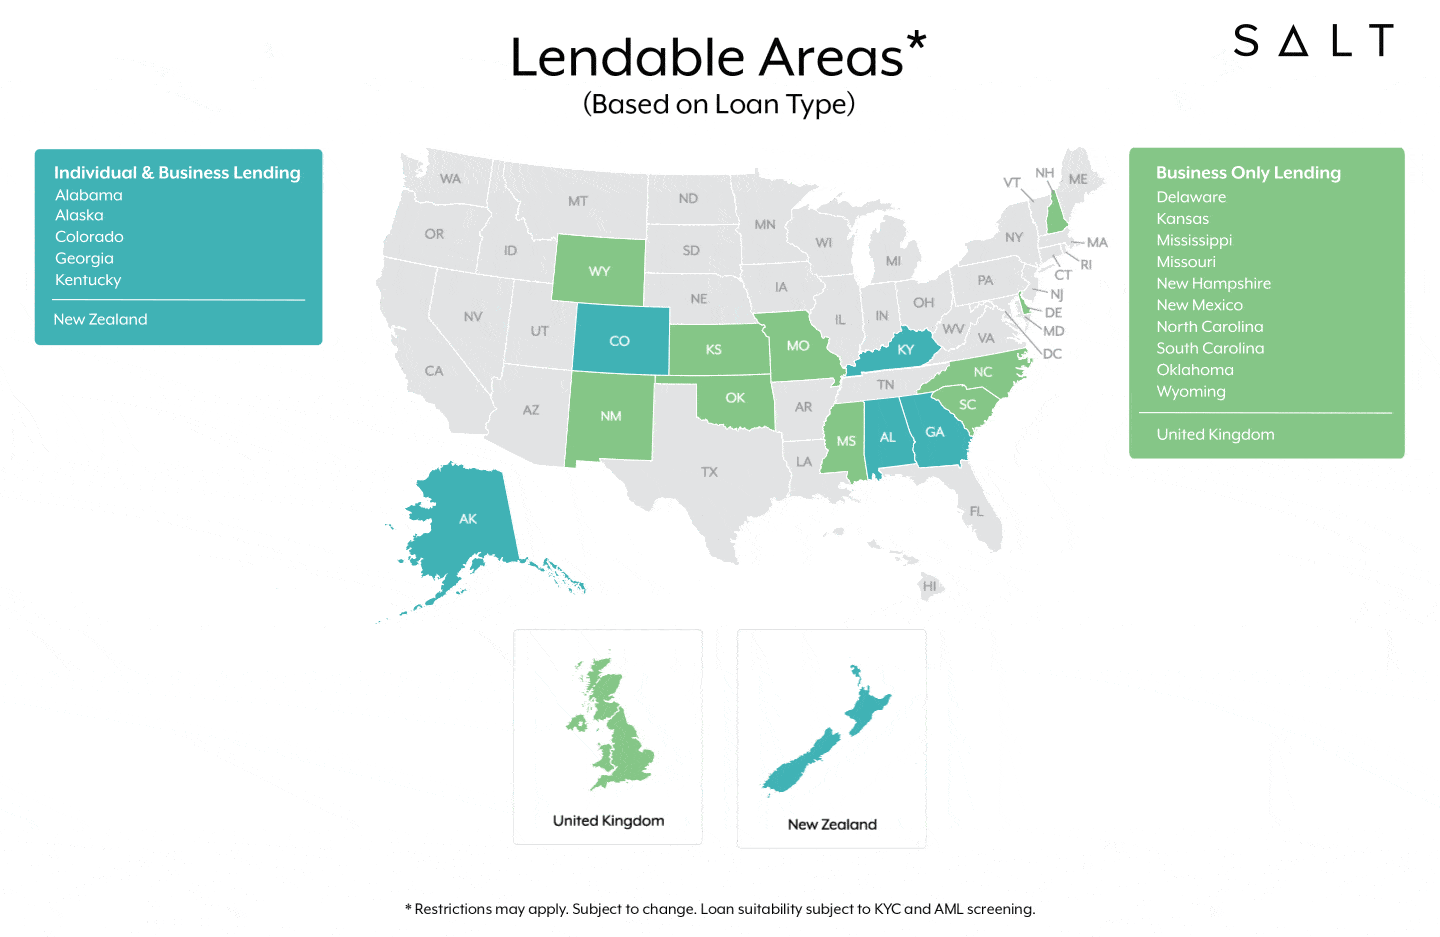 Lendable areas expanding for both business and personal loans